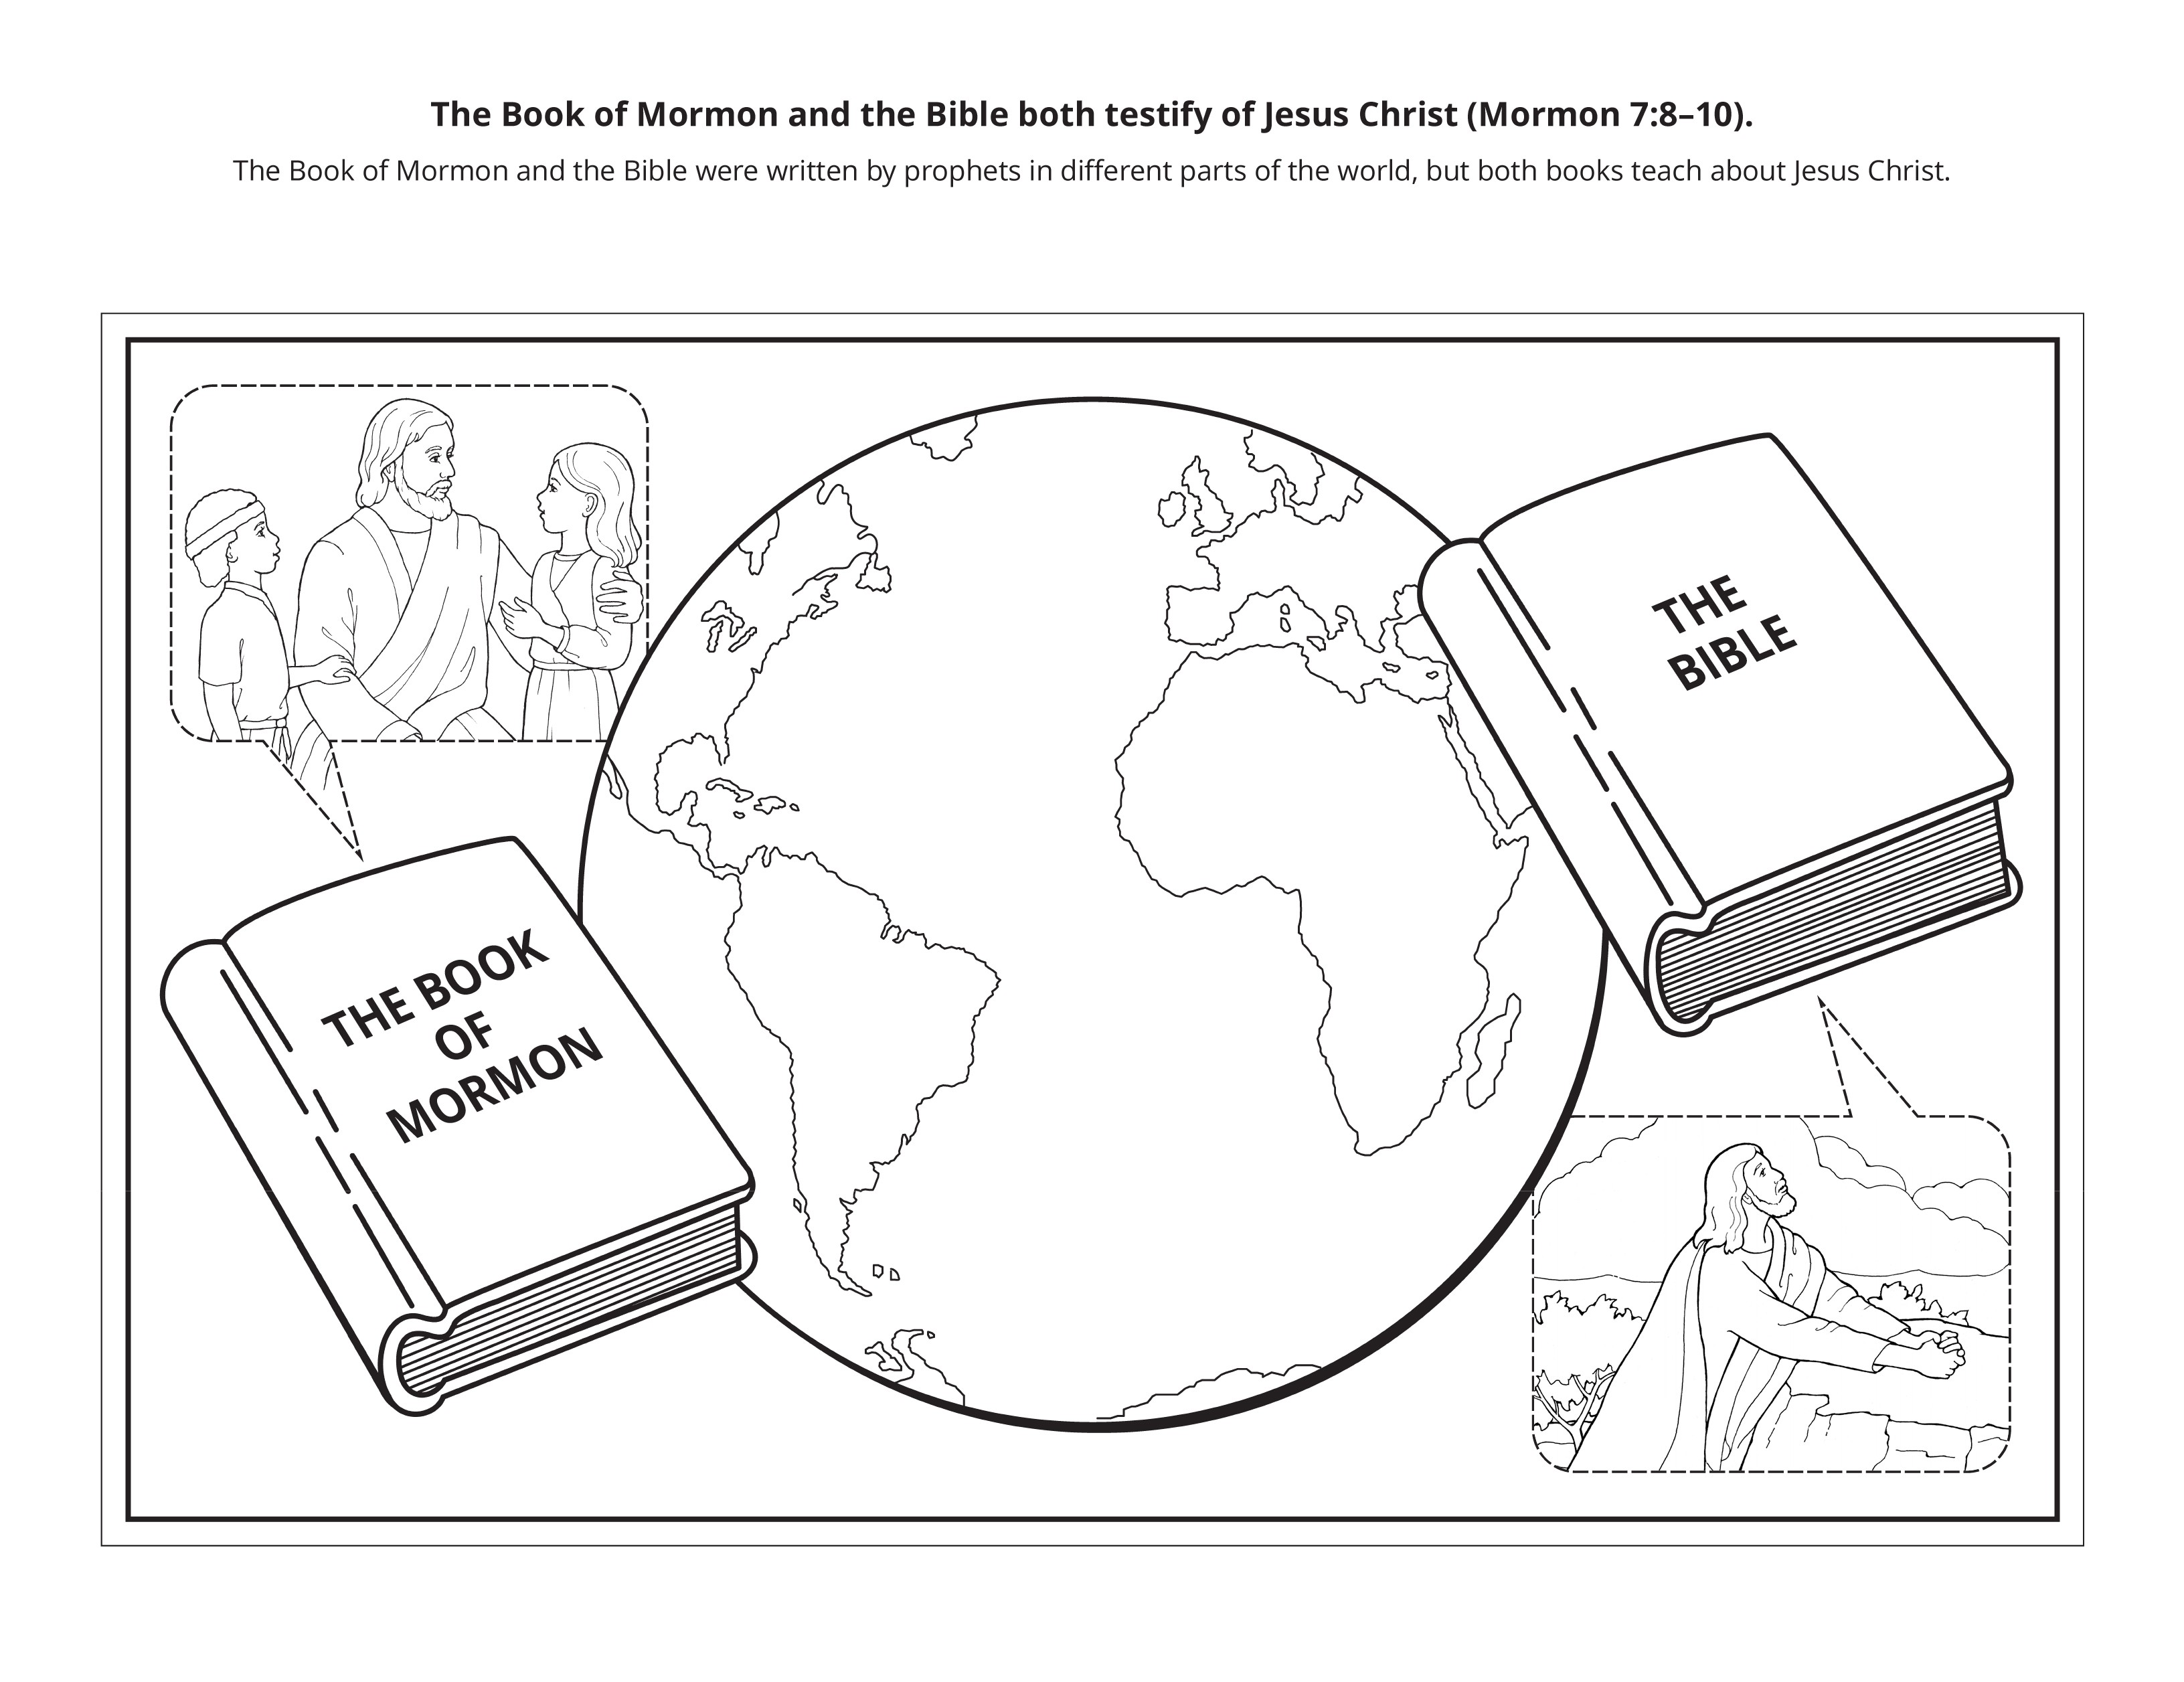 A line drawing of the Savior, the earth, the Book of Mormon, the Bible, and Jesus Christ.